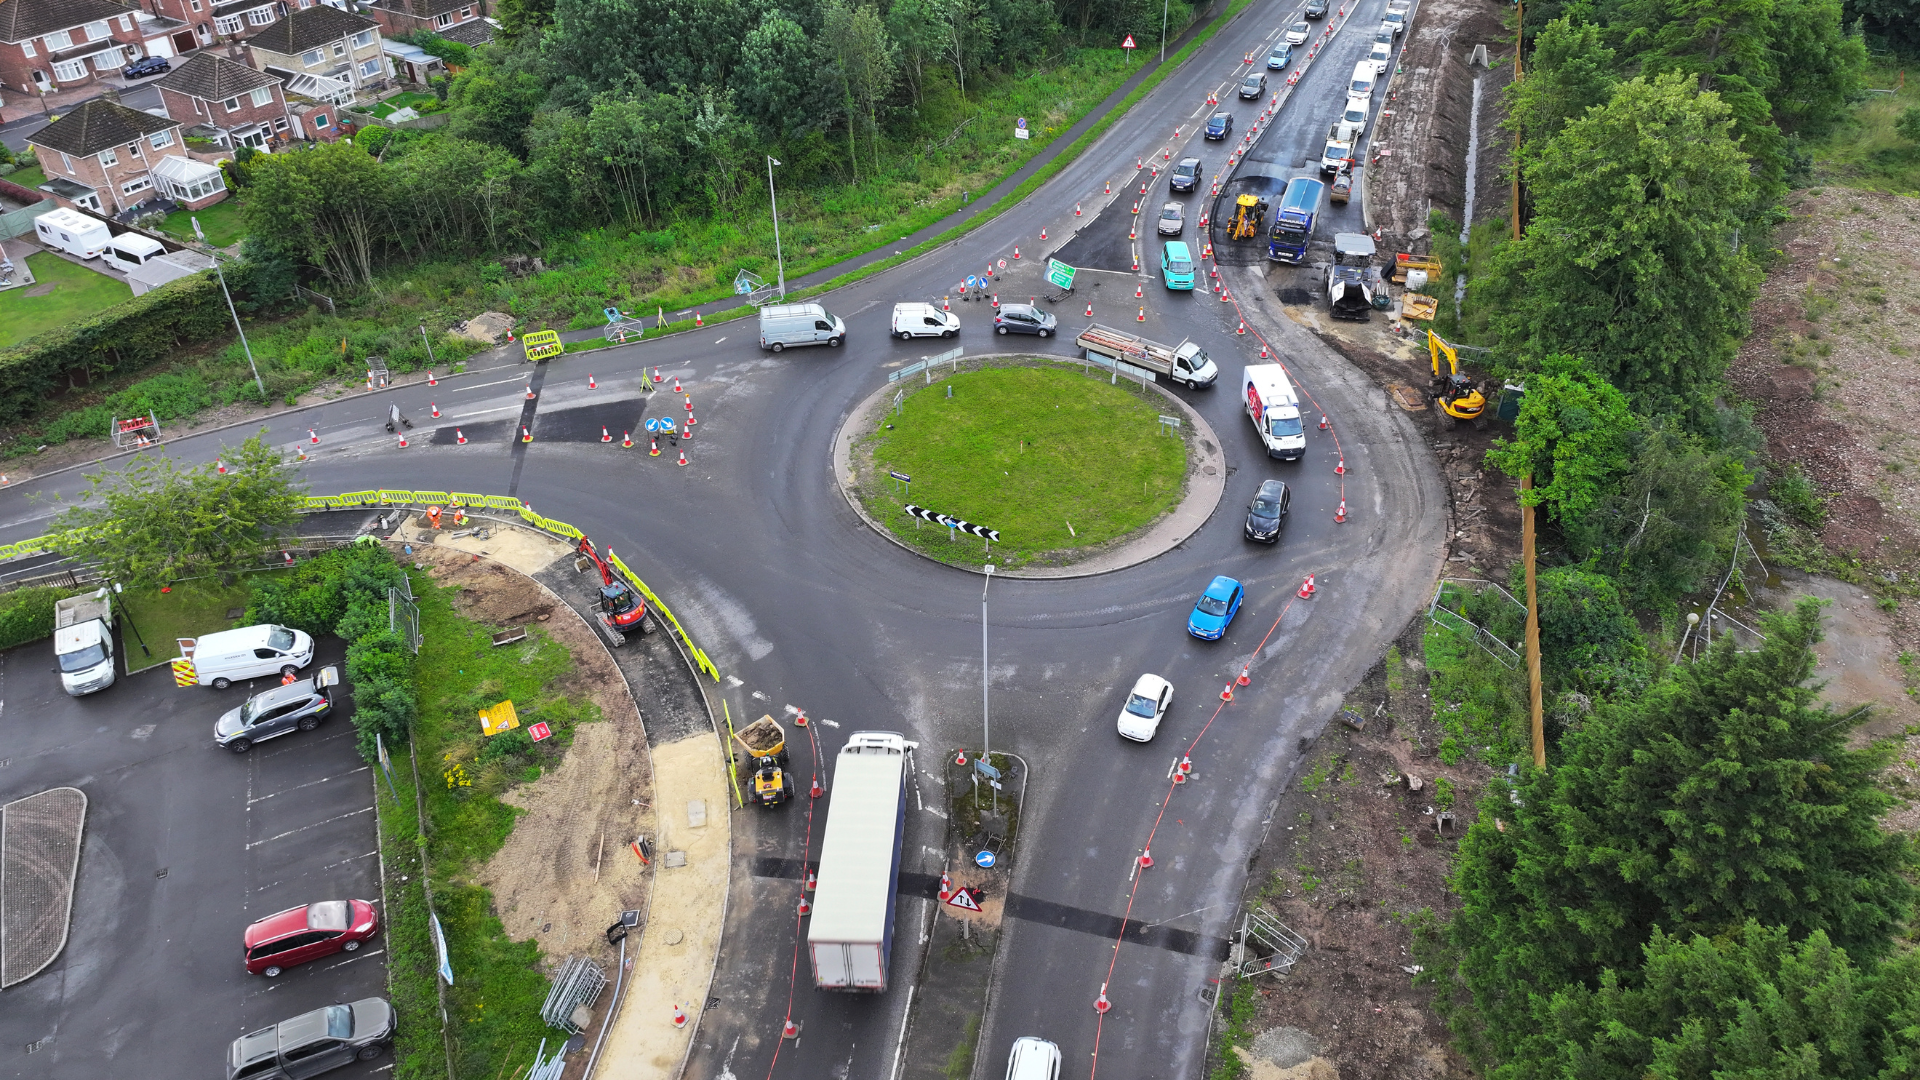 A birds eye view of the work happening on the A16 Marsh Lane roundabout